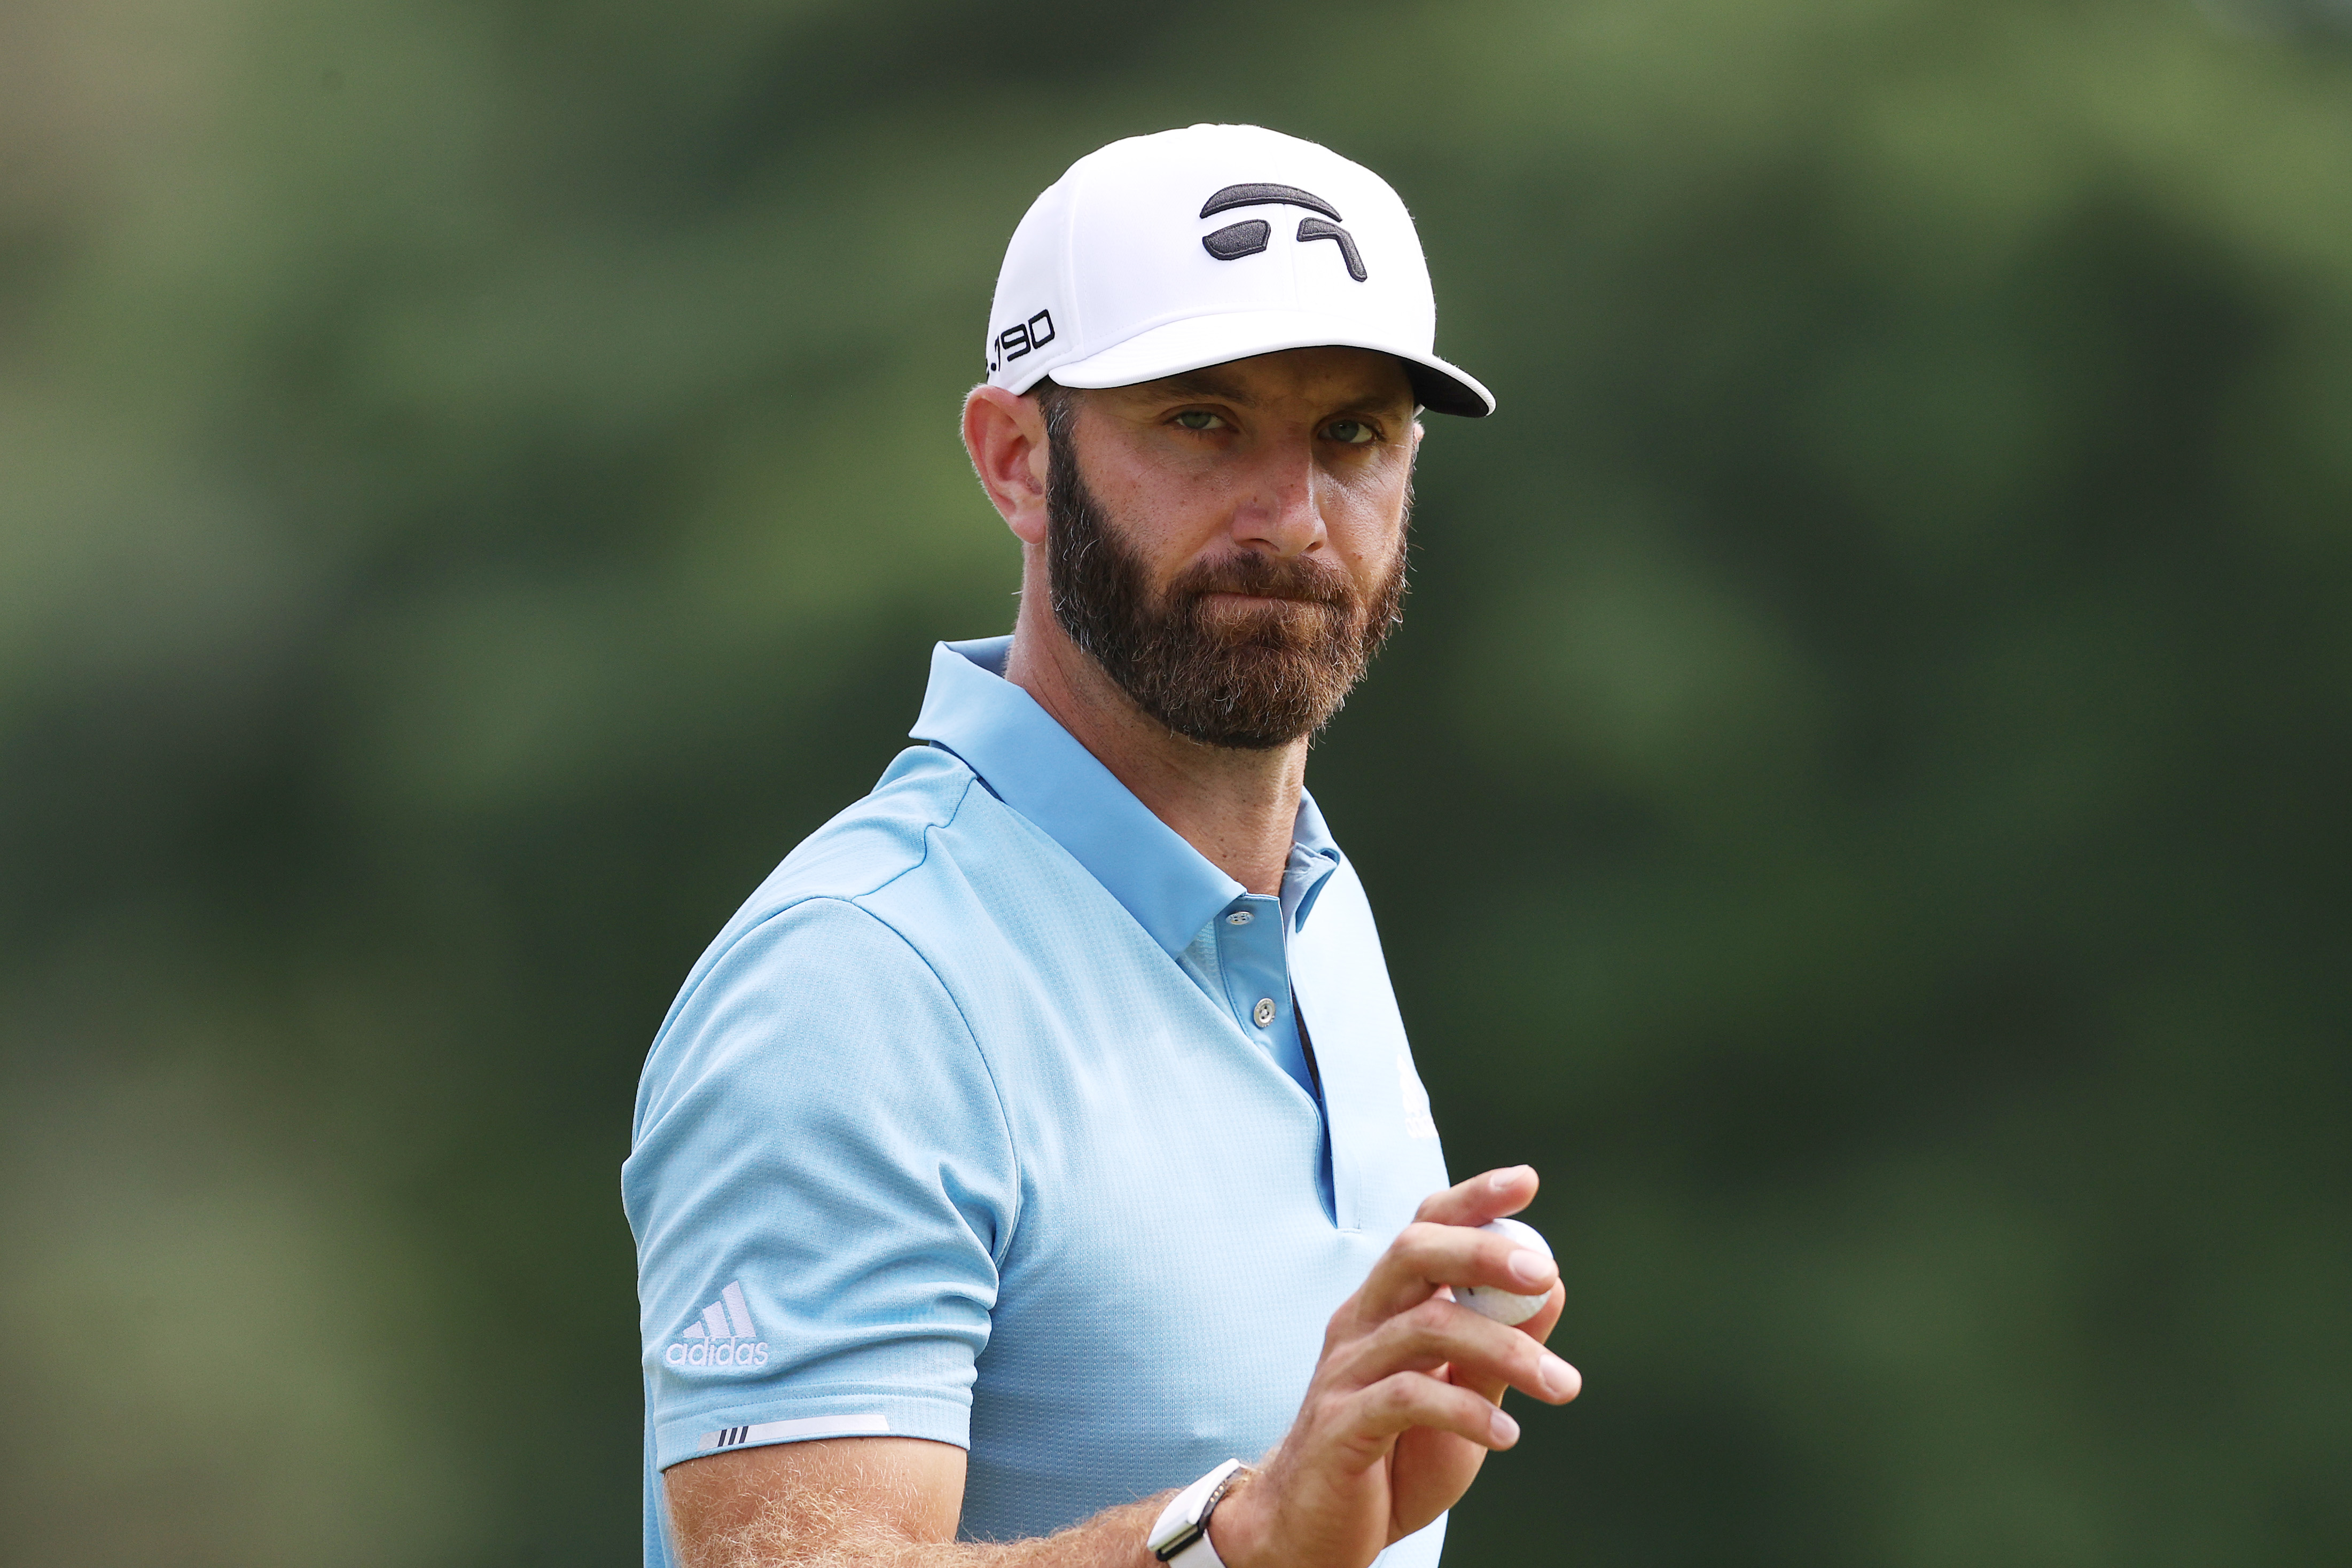 Dustin Johnson's Family: 5 Fast Facts You Need to Know